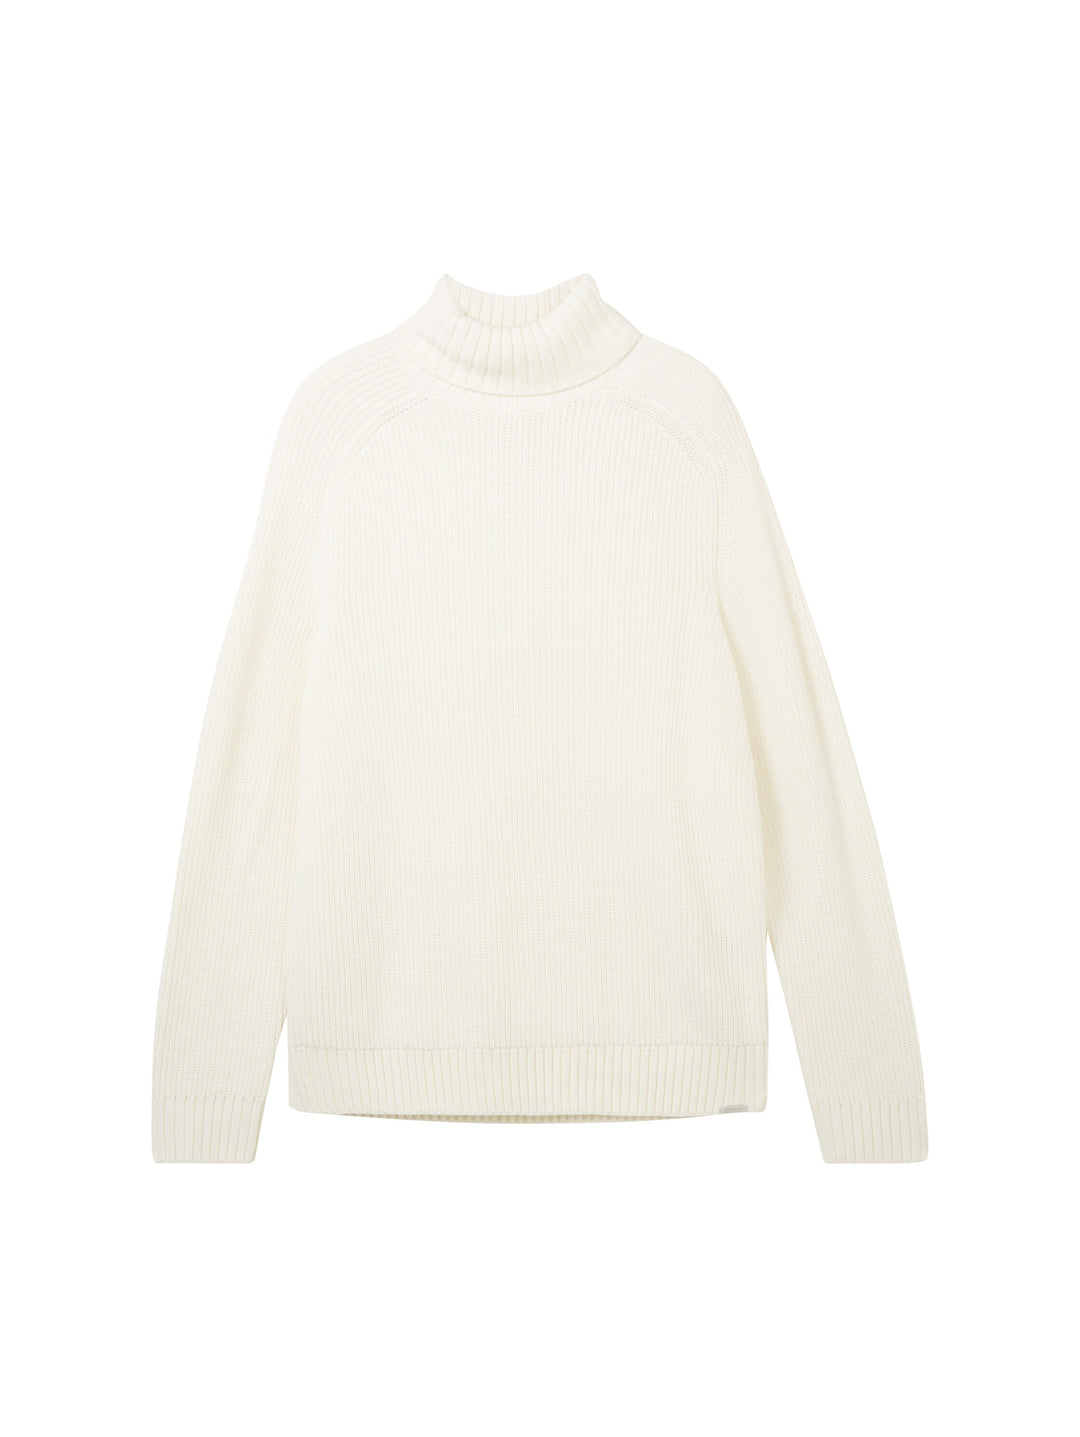 RELAXED TURTLENECK KNIT